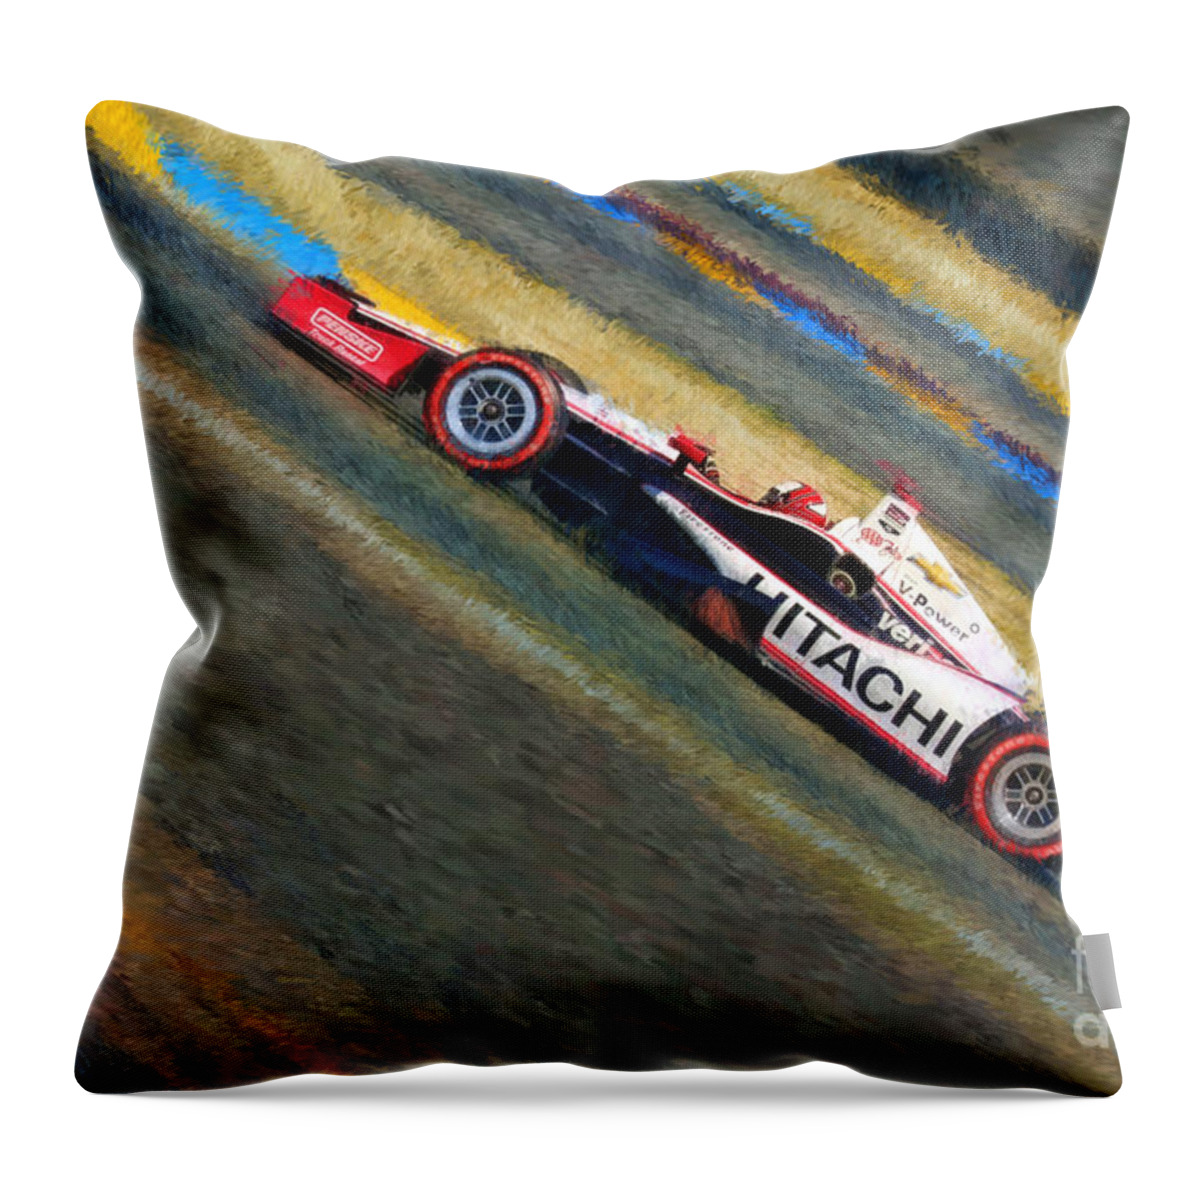 Indy Car's Throw Pillow featuring the photograph Indy Car's Helio Castroneves by Blake Richards